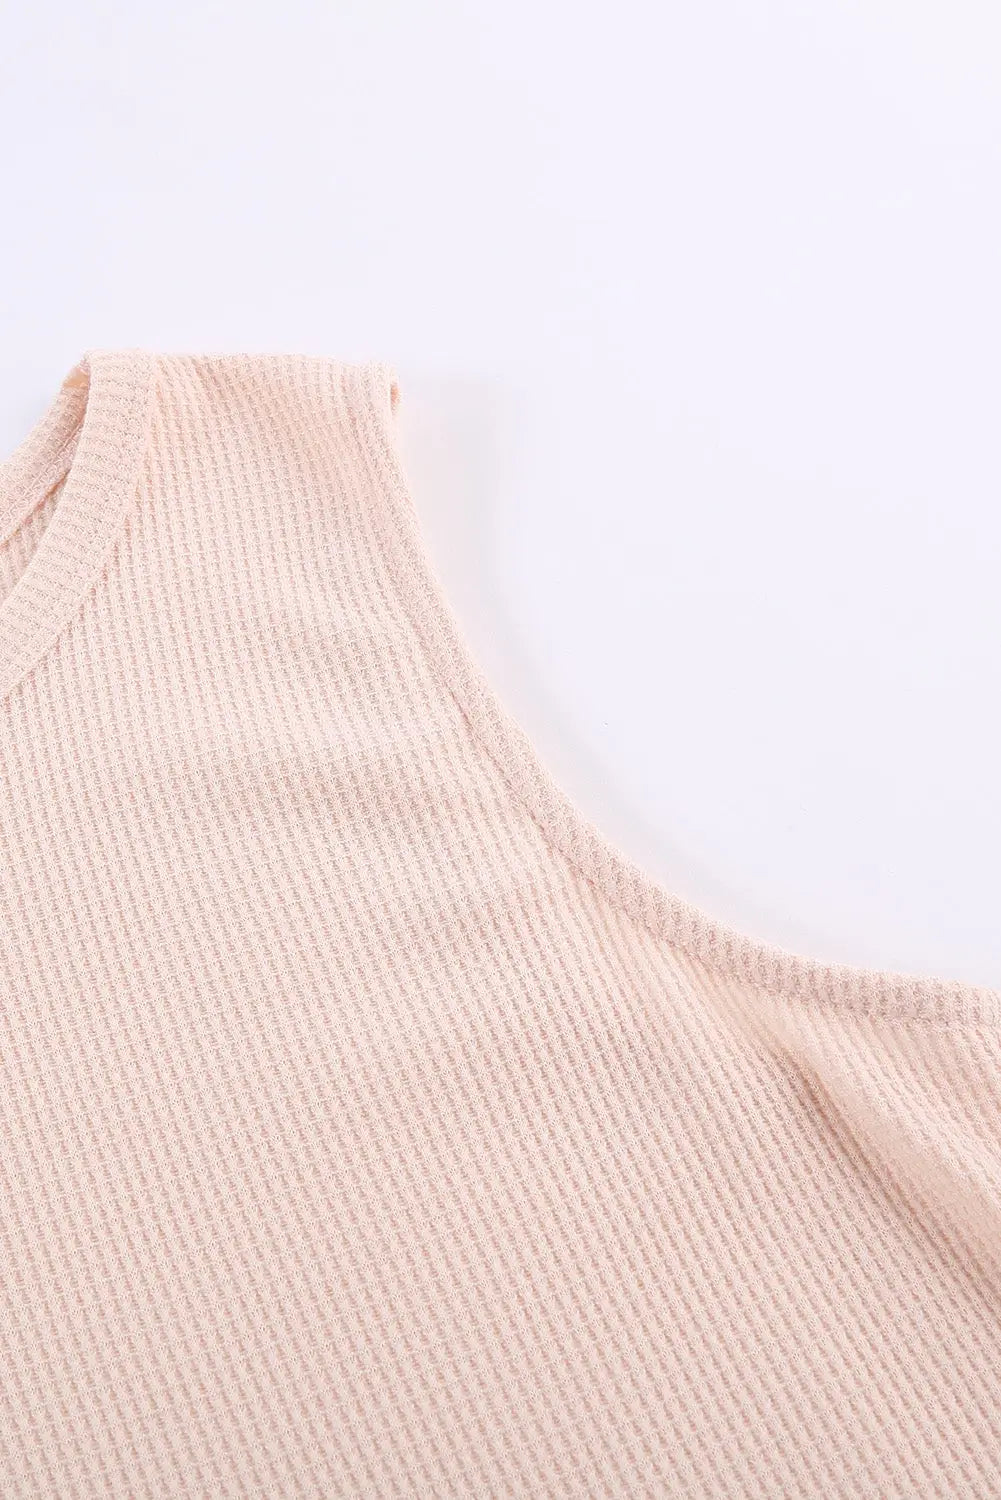 Apricot crew neck waffle tank top - tops